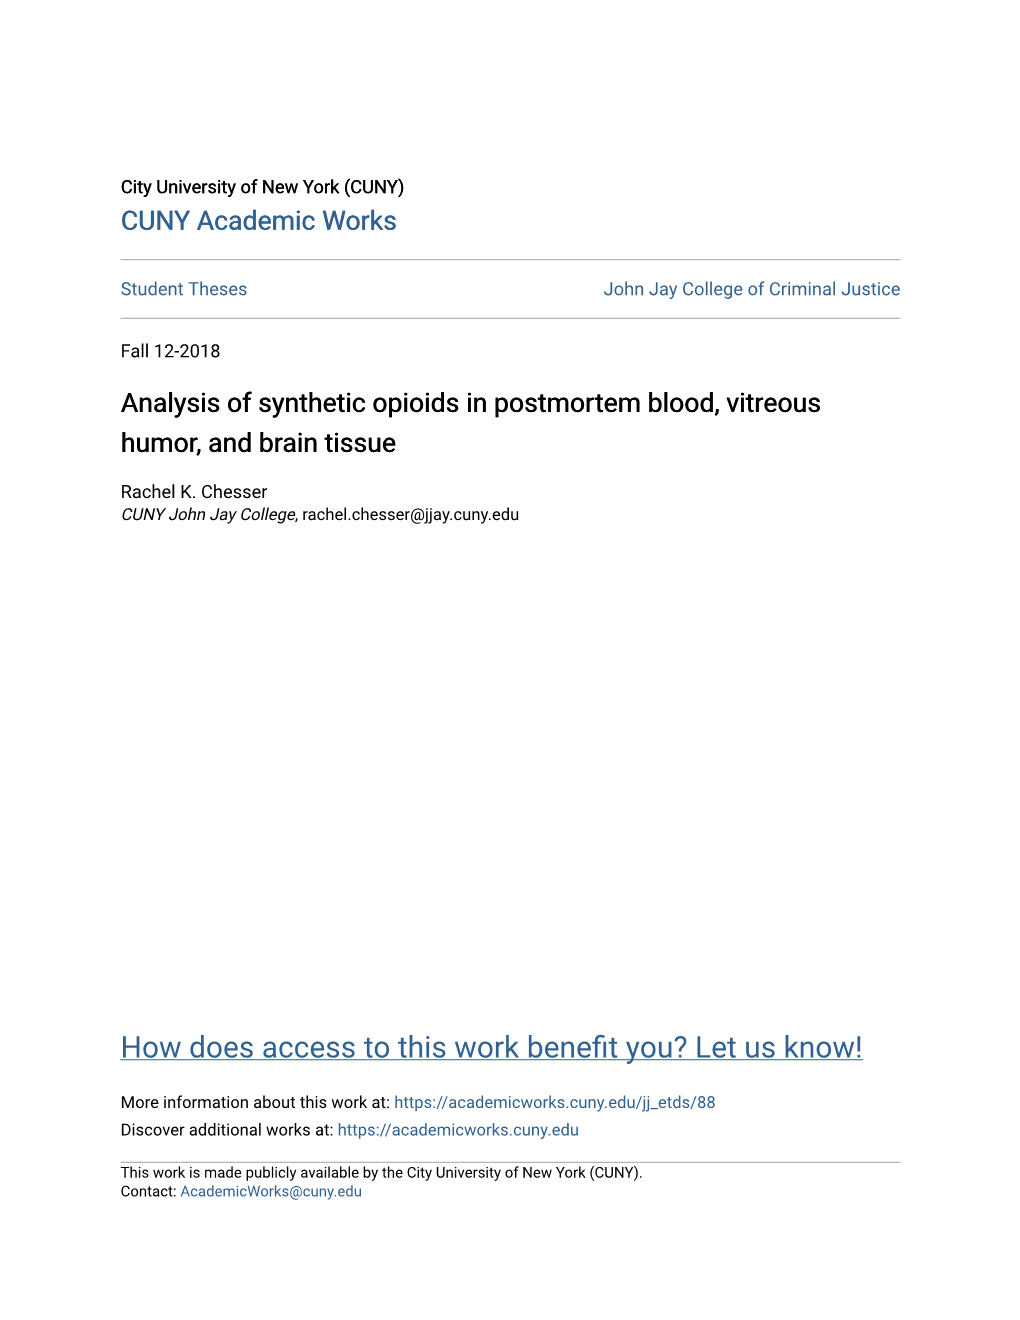 Analysis of Synthetic Opioids in Postmortem Blood, Vitreous Humor, and Brain Tissue